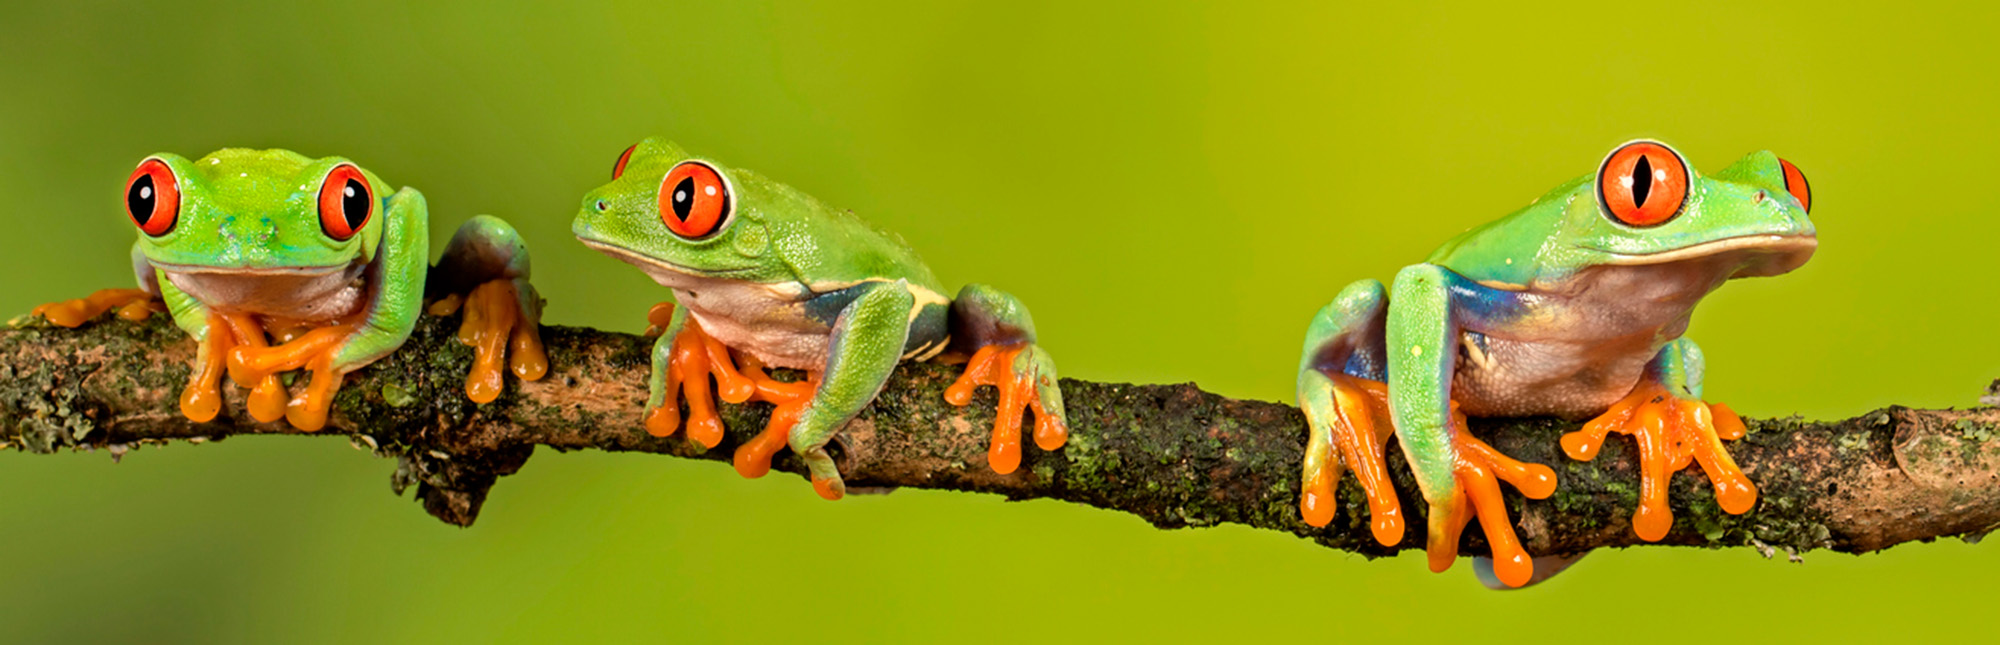 Tree frogs on a branch